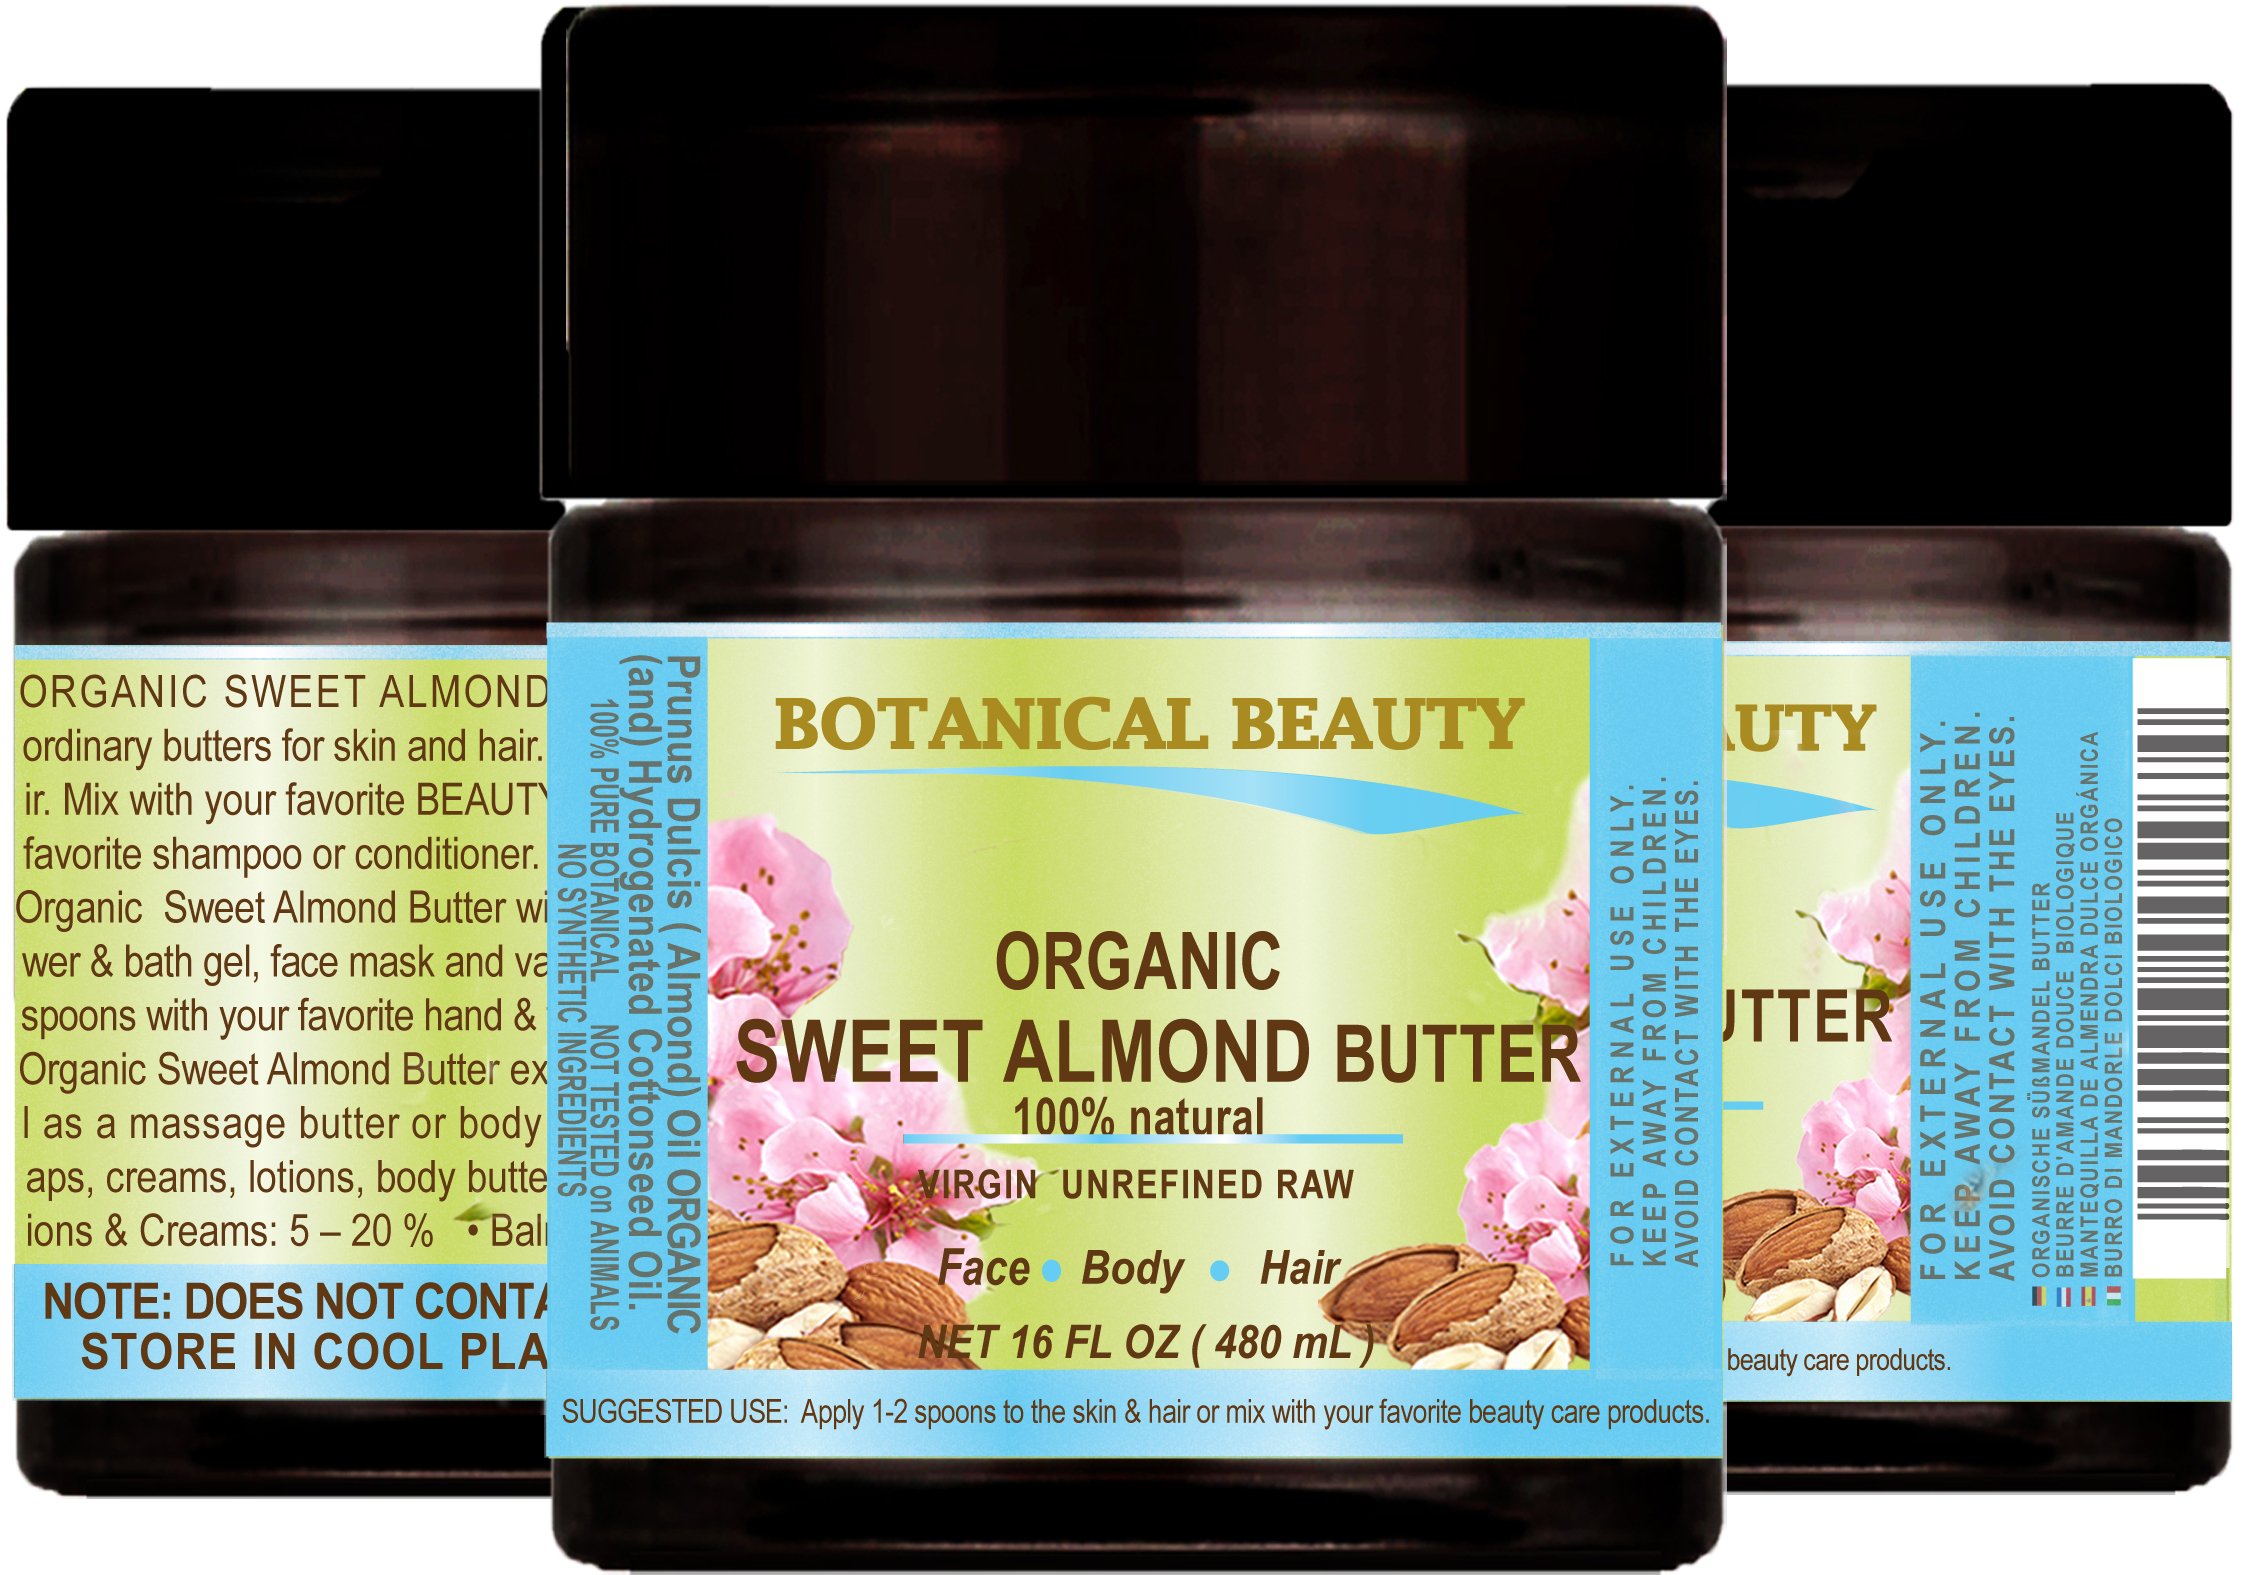 SWEET ALMOND OIL - BUTTER ORGANIC RAW. 100% Natural/VIRGIN/UNREFINED. 16 Fl.oz.- 480 ml. For Skin, Hair and Nail Care.